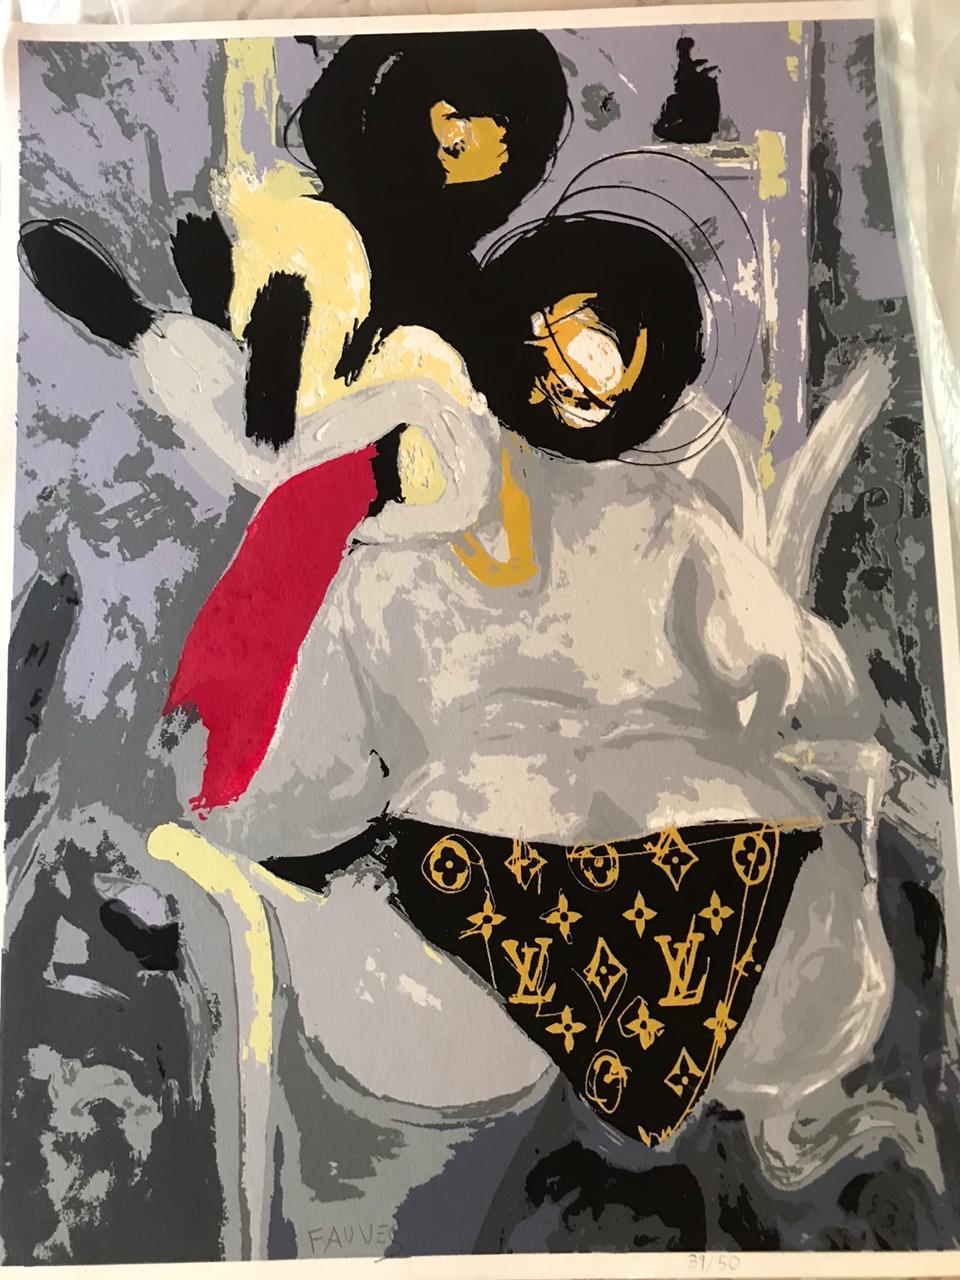 "Mickey under Louis" Silkscreen Print 39"x28" in Ed. 38/50 by John Paul Fauves 



ABOUT John Paul FAUVES: 
John Paul Fauves (born in 1980) is a contemporary Artist from Costa Rica . His artistic journey started at a very young age after he became a